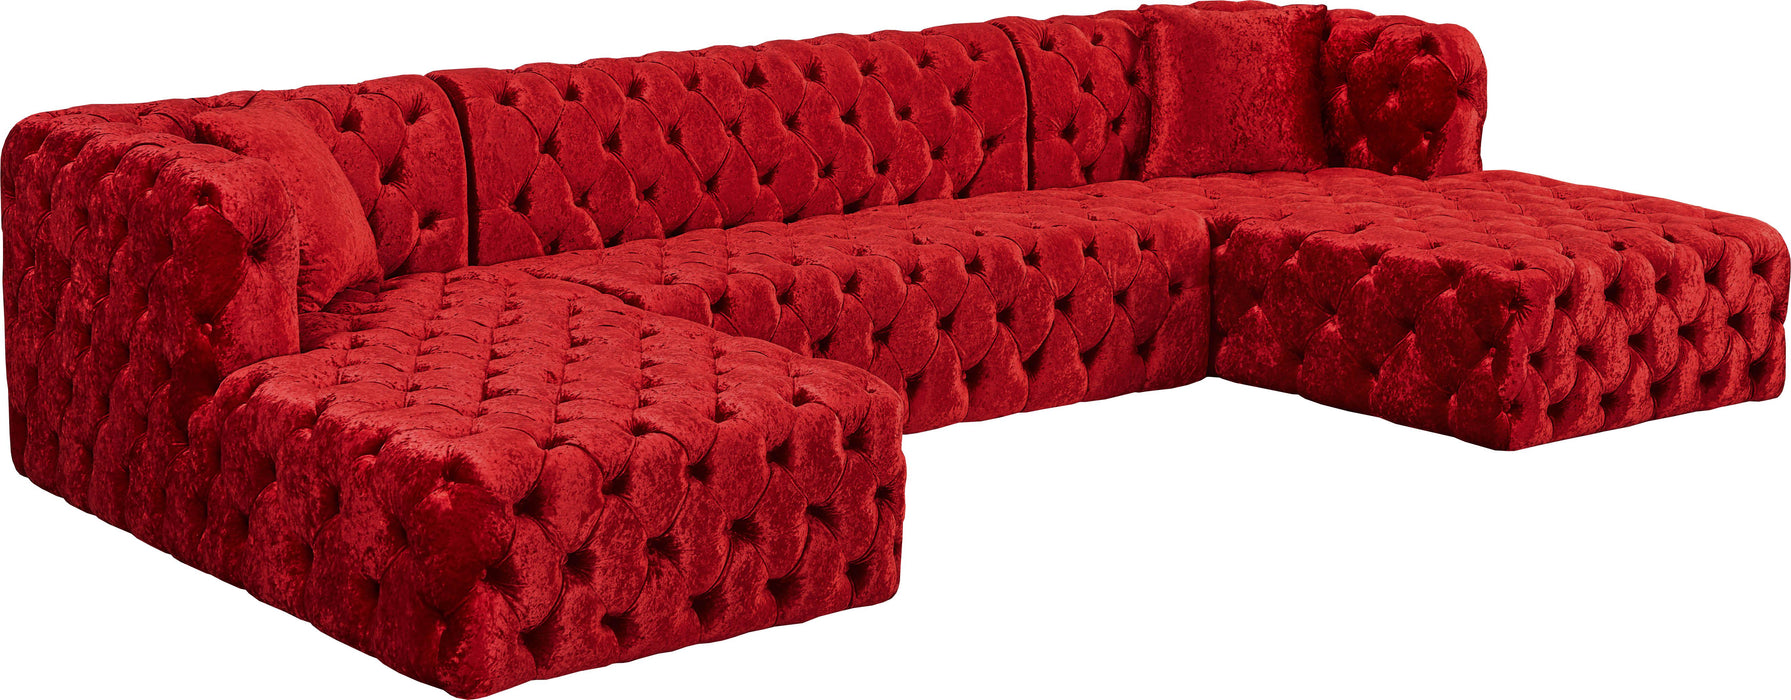 Coco Red Velvet 3pc. Sectional (3 Boxes) image